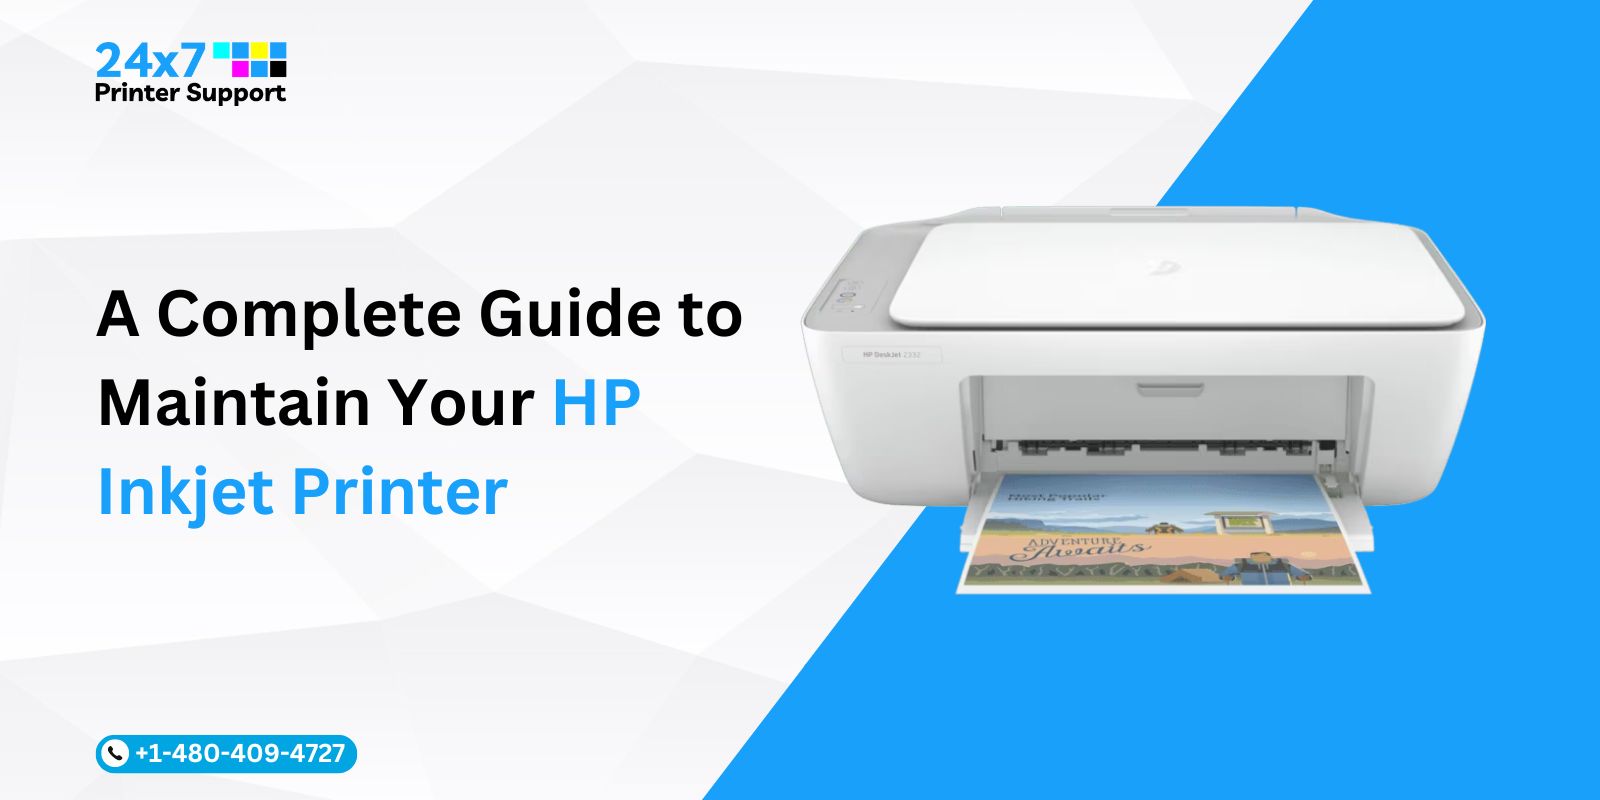 A Complete Guide to Maintain Your HP Inkjet Printer